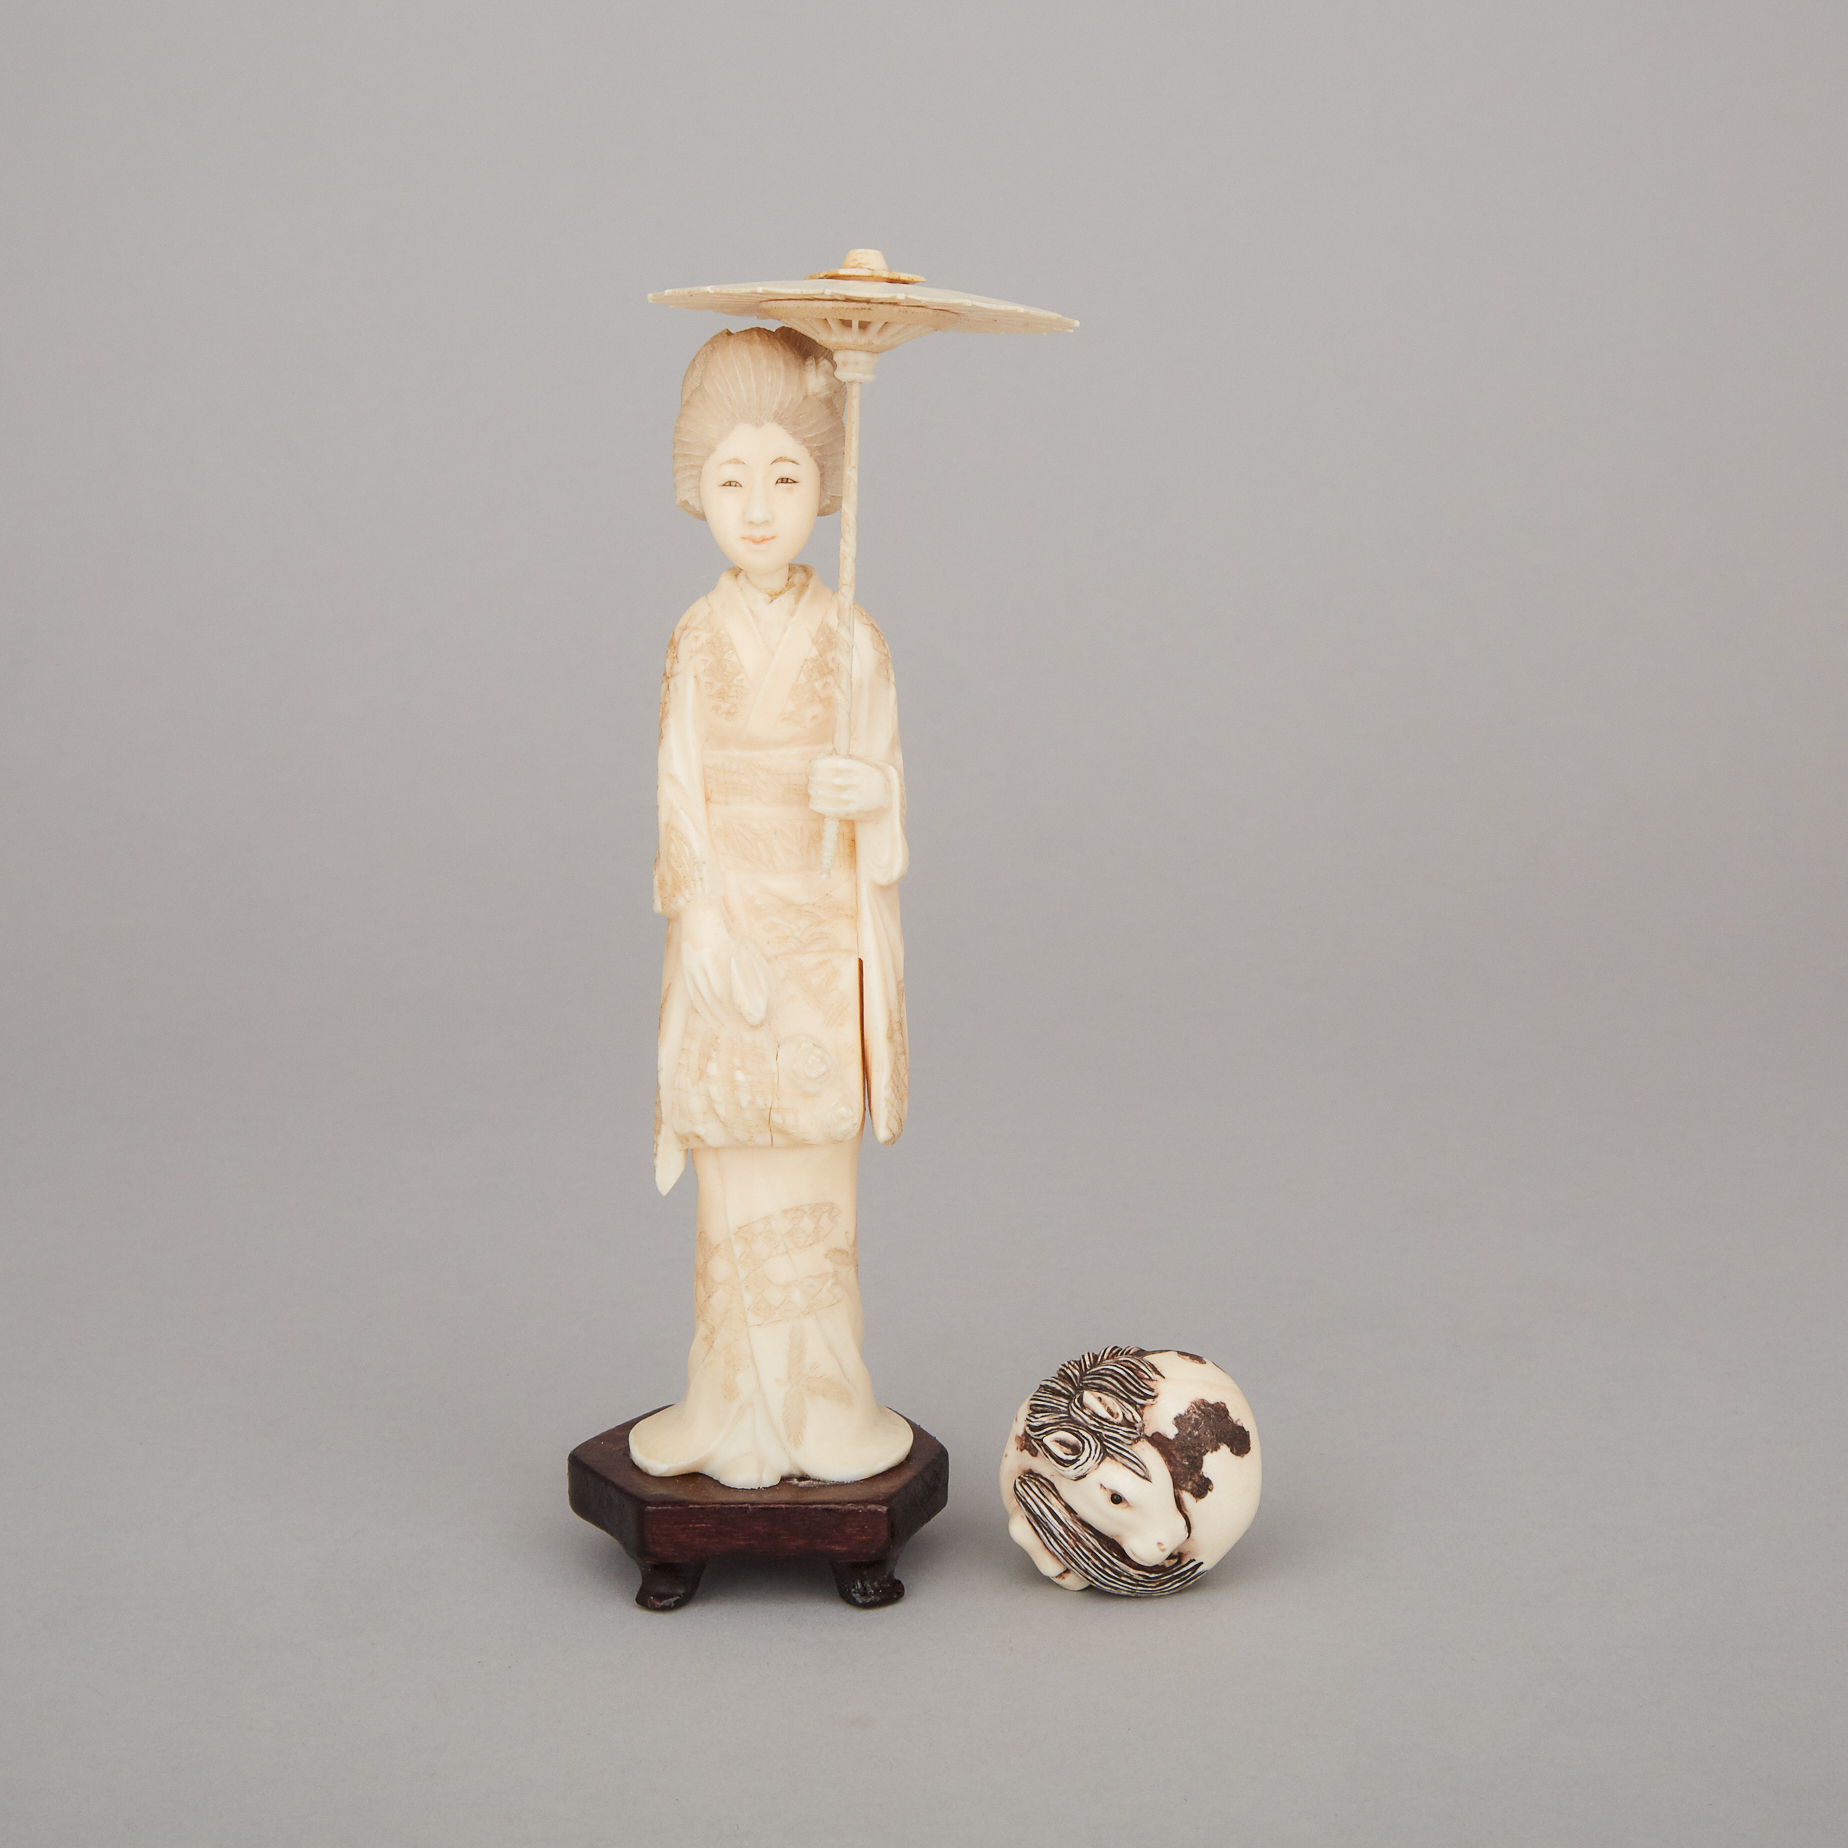 Two Japanese Ivory Carvings, Early 20th Century